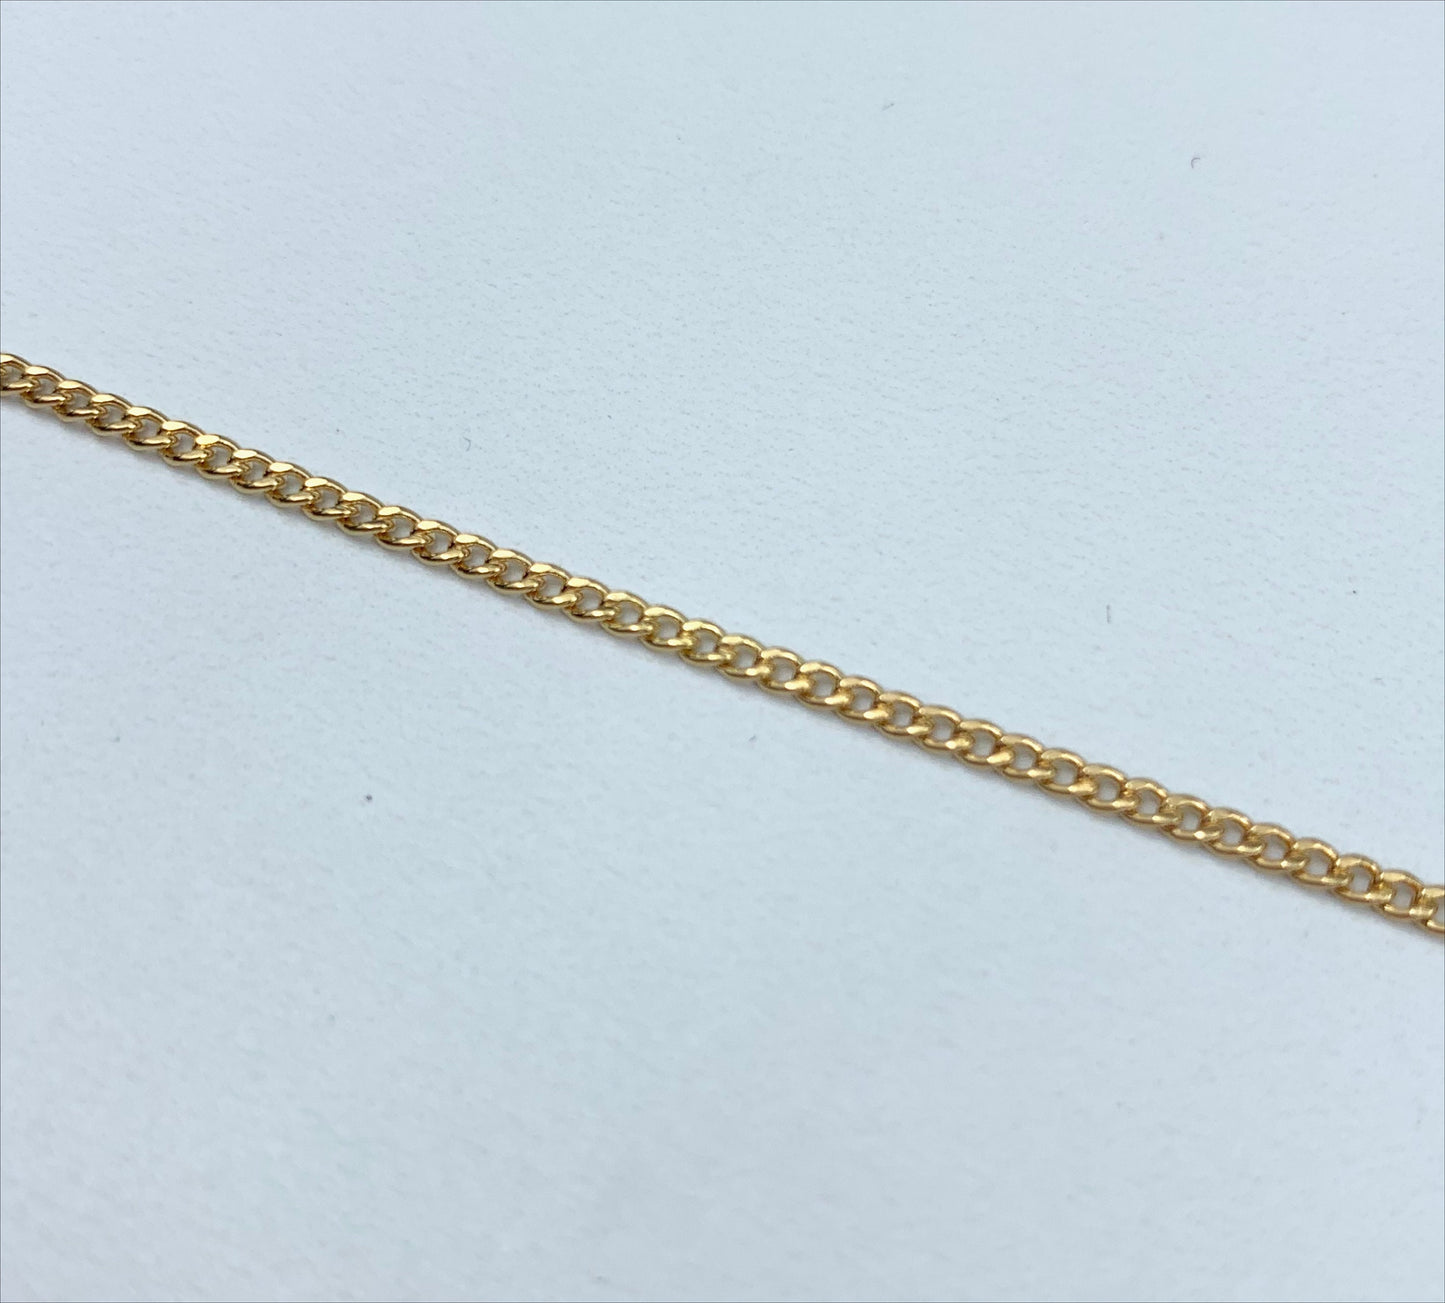 18k Gold Filled 2mm Cuban Link Chain Key and Balls Charms Anklet Wholesale Jewelry Supplies